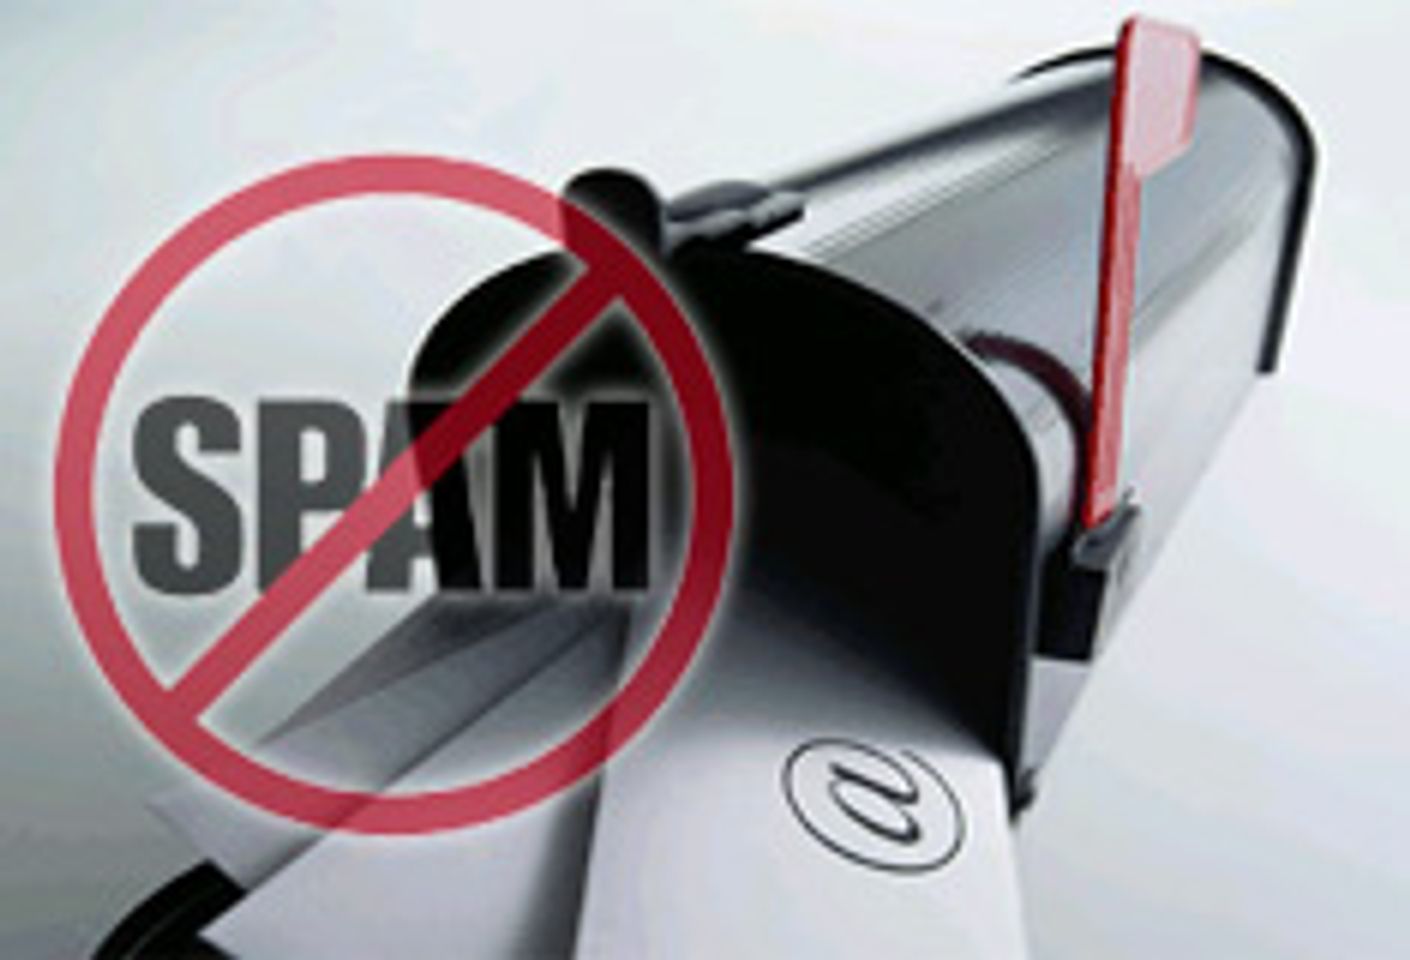 Sender Authentication Not Exactly Crushing Spam: Report